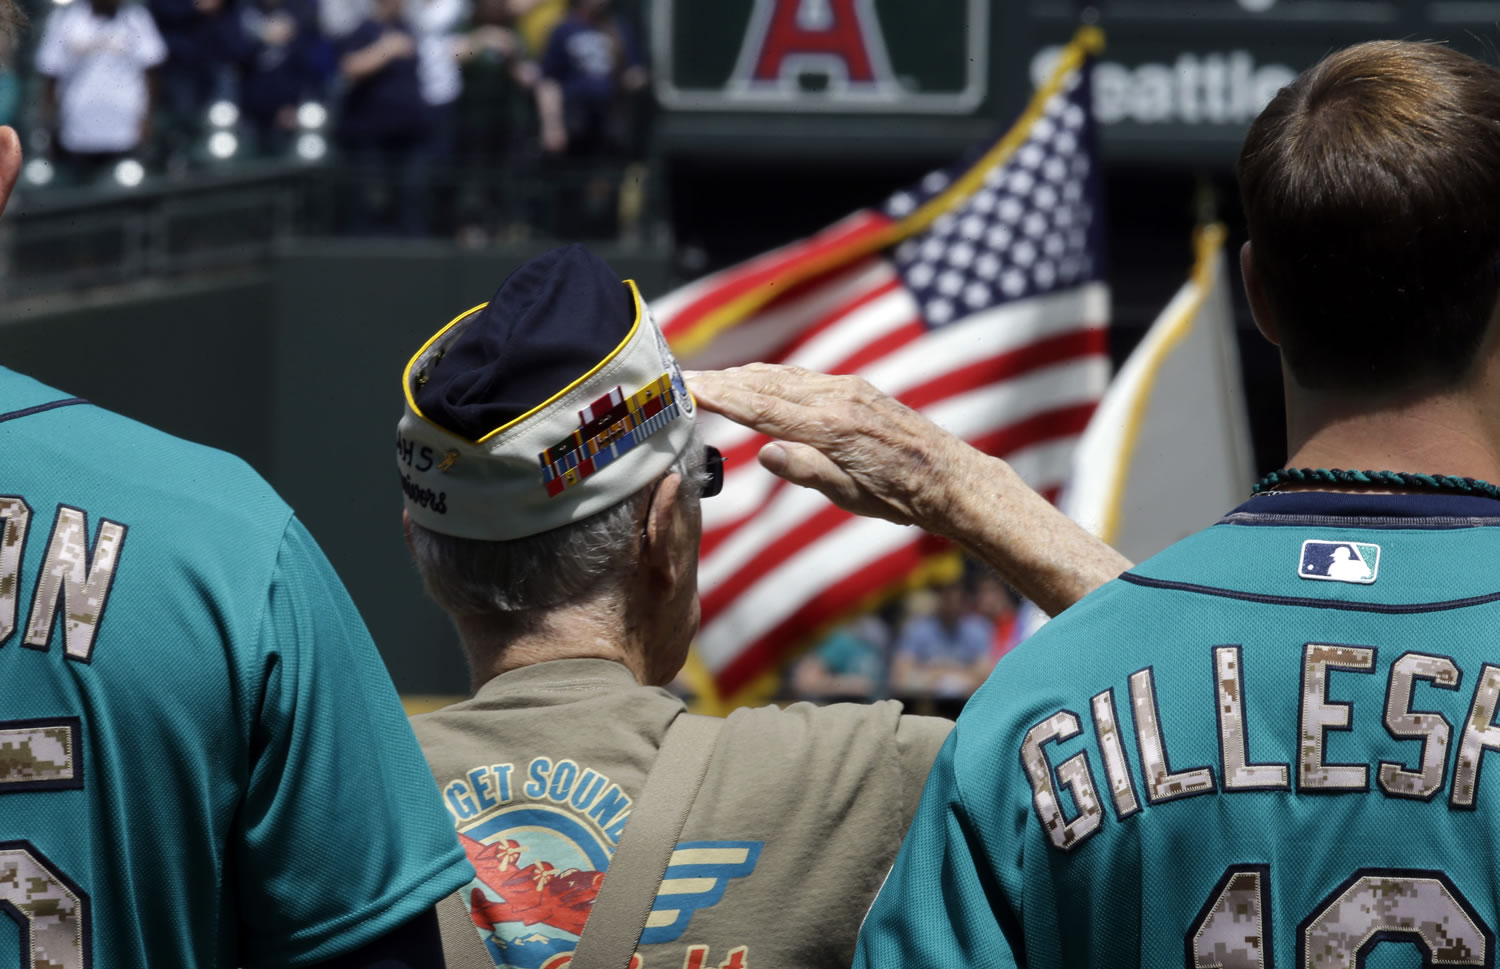 Veteran Ralph Laedtke, of Washougal, stands between Seattle Mariners players as he salutes during the national anthem before Monday's game at Safeco Field. Veterans were honored before the game in recognition of Memorial Day.